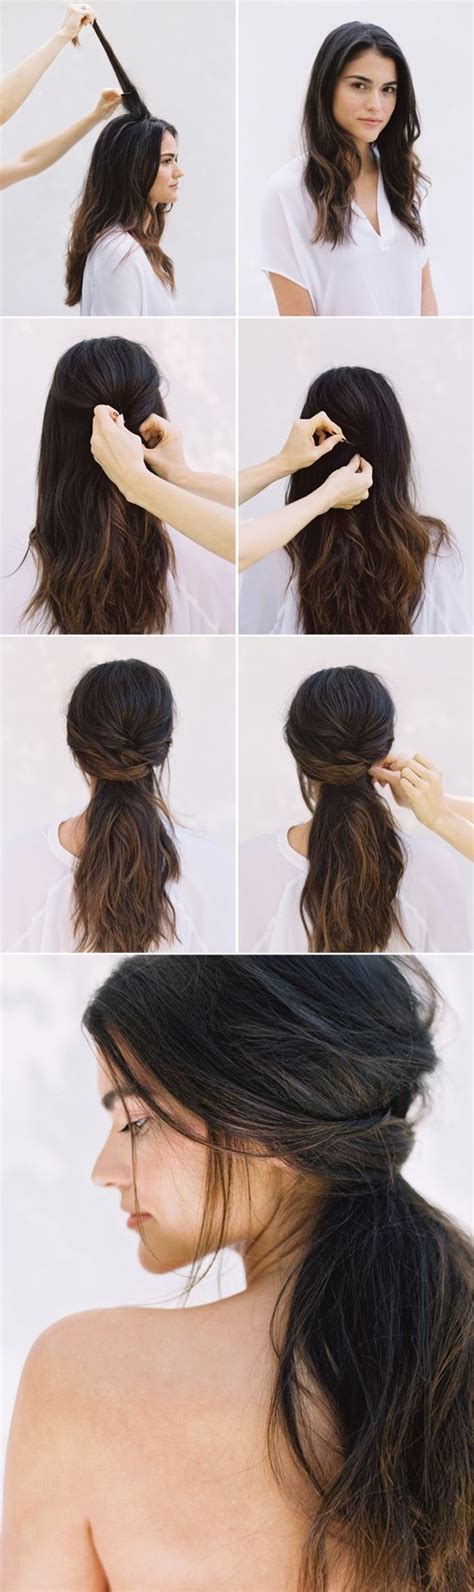 Easy updo for short hair this easy updo for short hair is as simple as pulling your hair back with braids and bobby pinning the pieces. 15 Best of Quick Easy Updo Hairstyles For Thick Hair